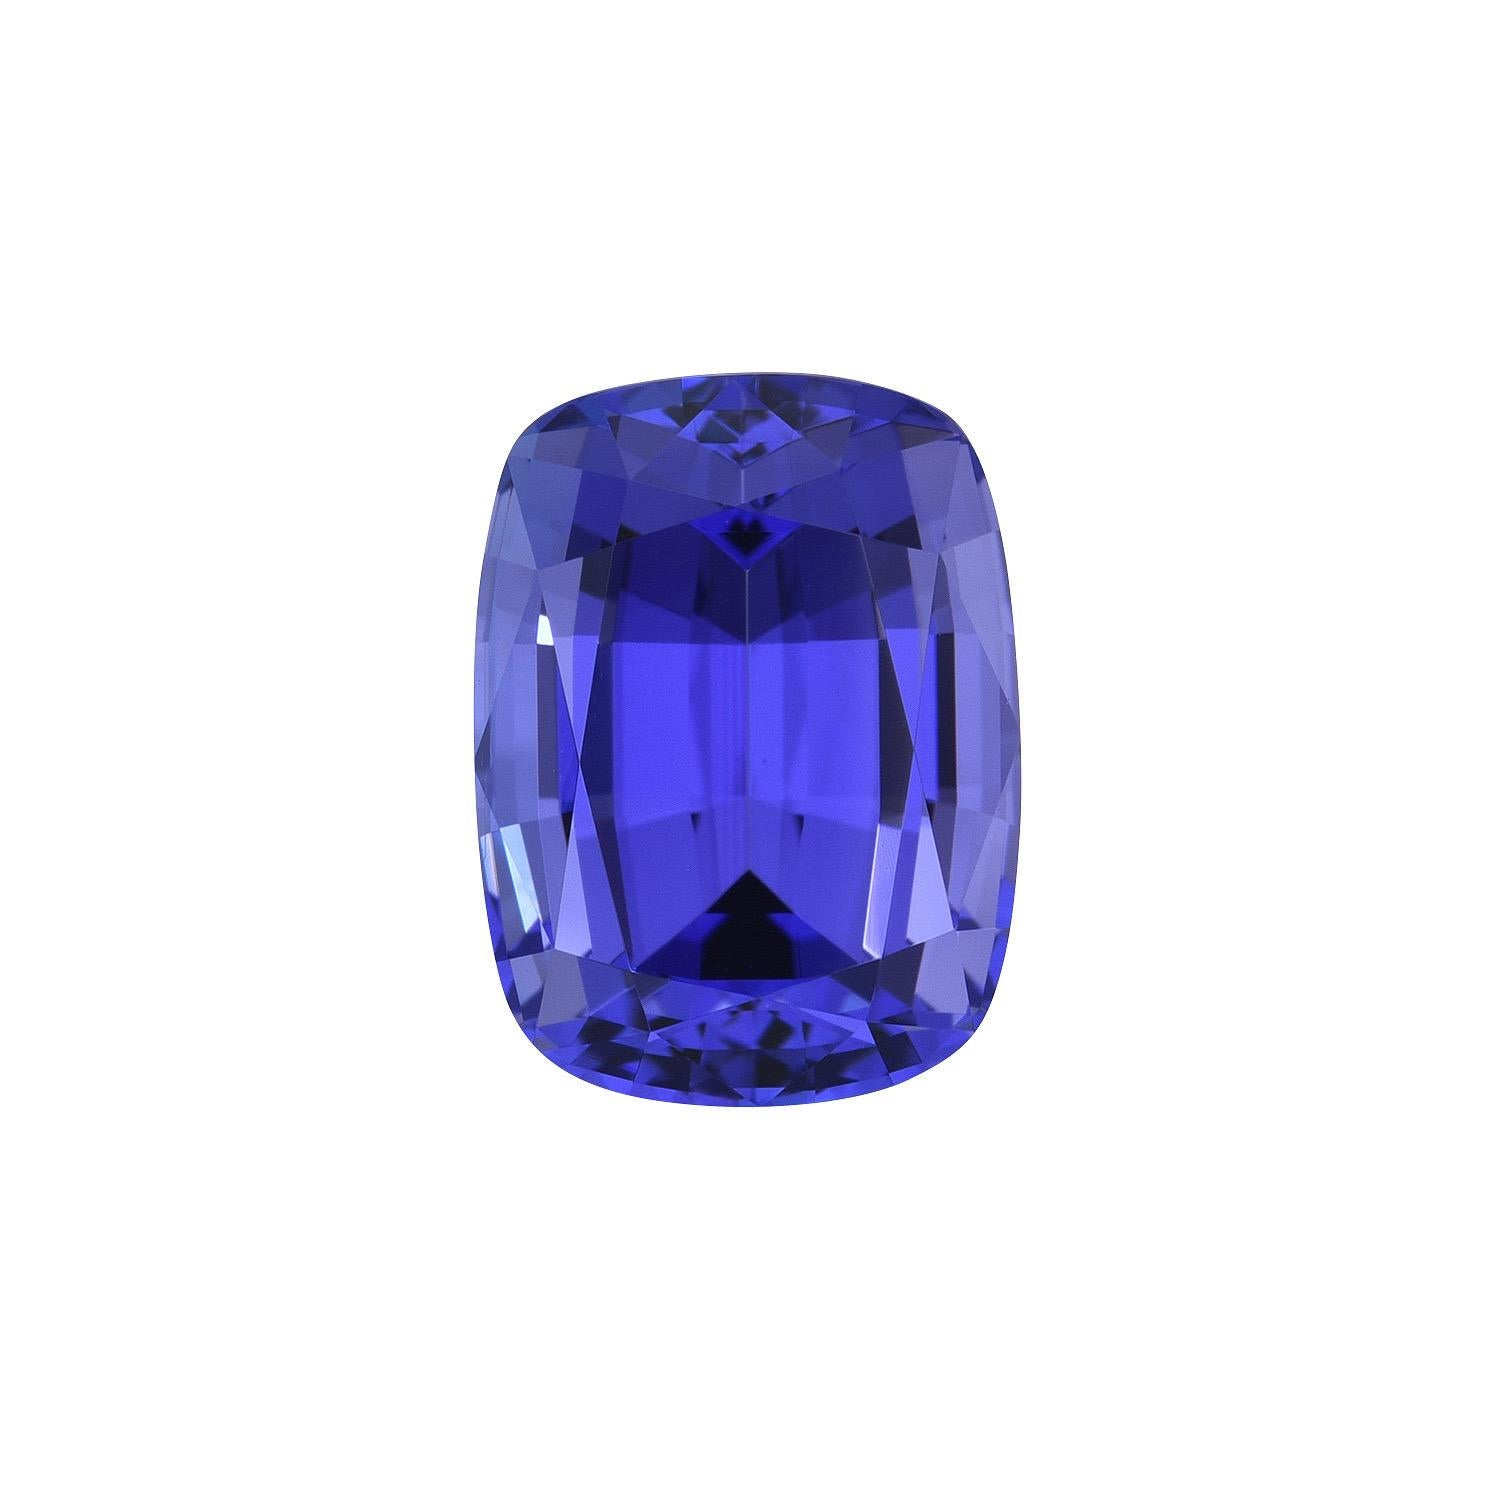 Fantastic 3.07 carat Tanzanite cushion loose gemstone, offered unmounted to a fine gem lover.
Dimensions: 9.6 x 7.6 x 5.5 mm.
Returns are accepted and paid by us within 7 days of delivery.
We offer supreme custom jewelry work upon request. Please